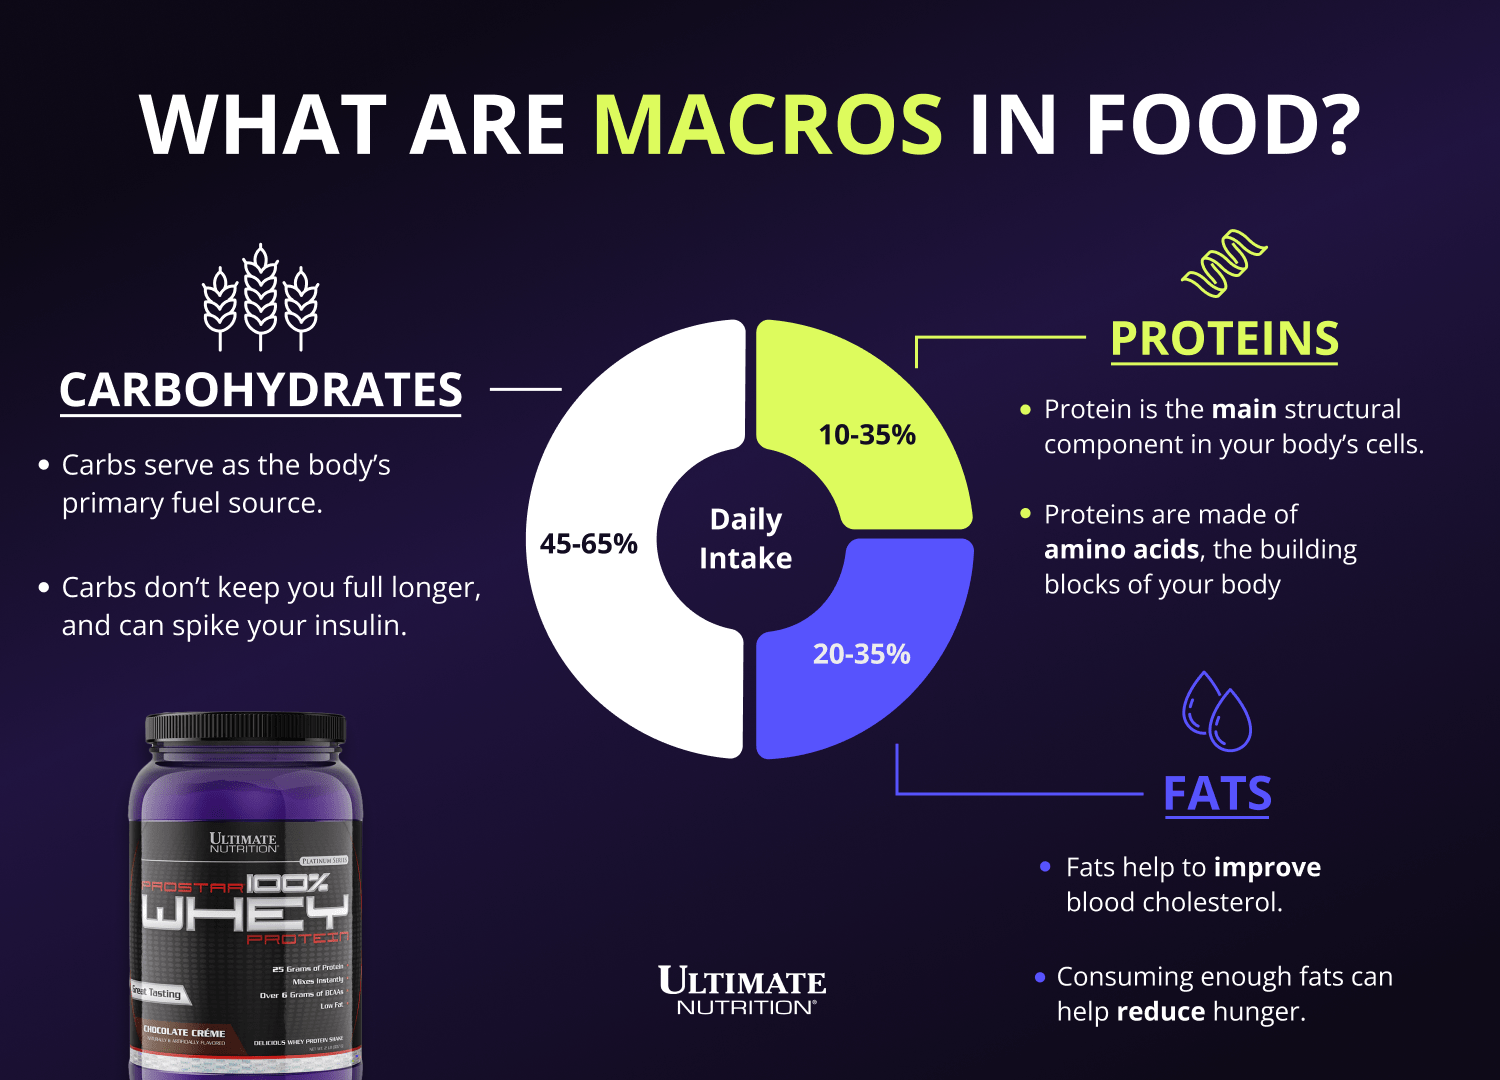 What are Macros in Food?